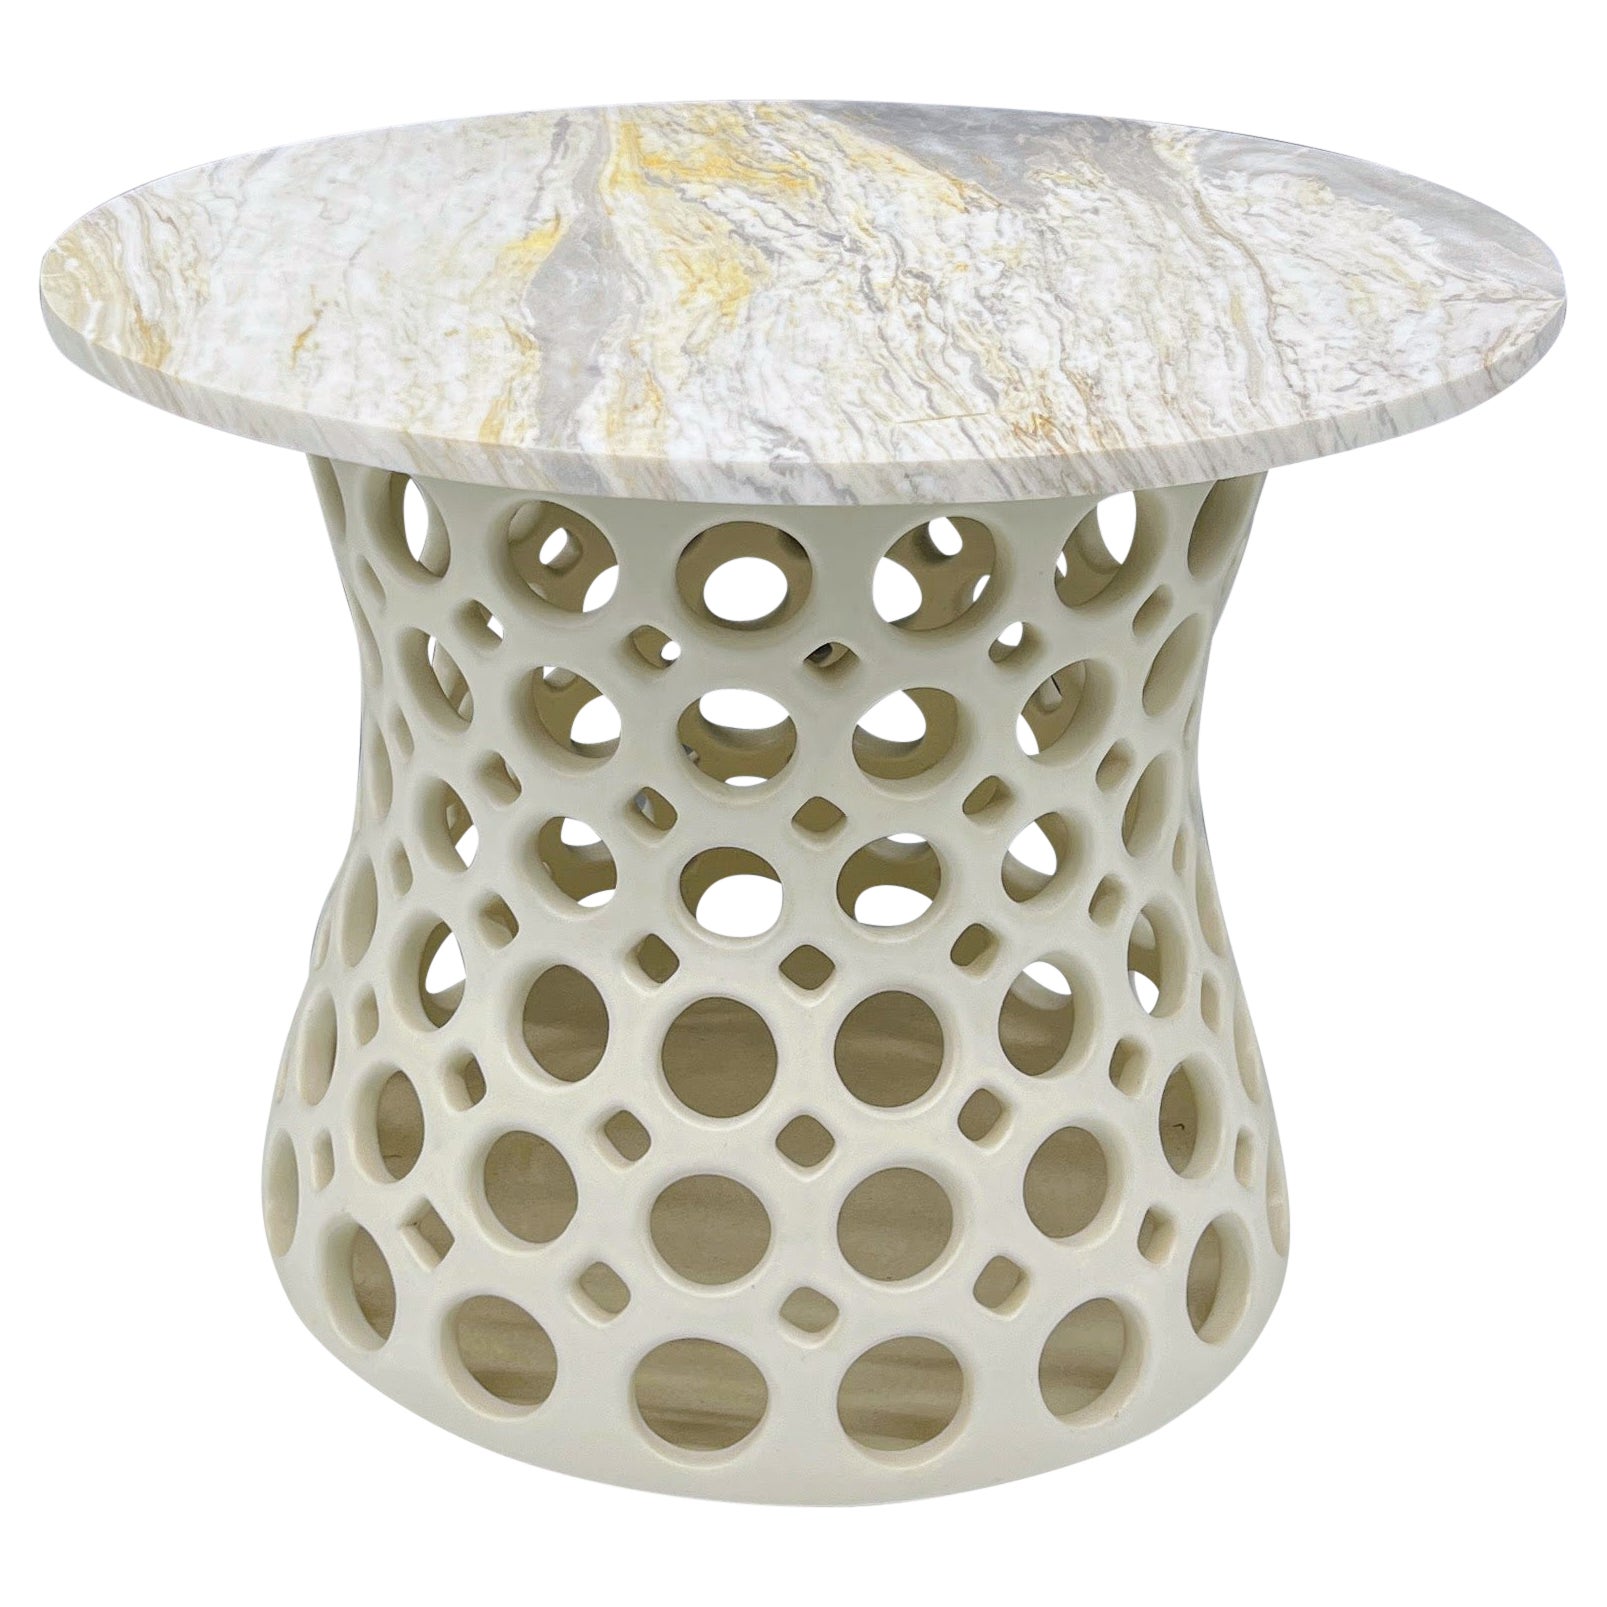 Pierced White Ceramic Side Table with Grey, White Stone Top For Sale